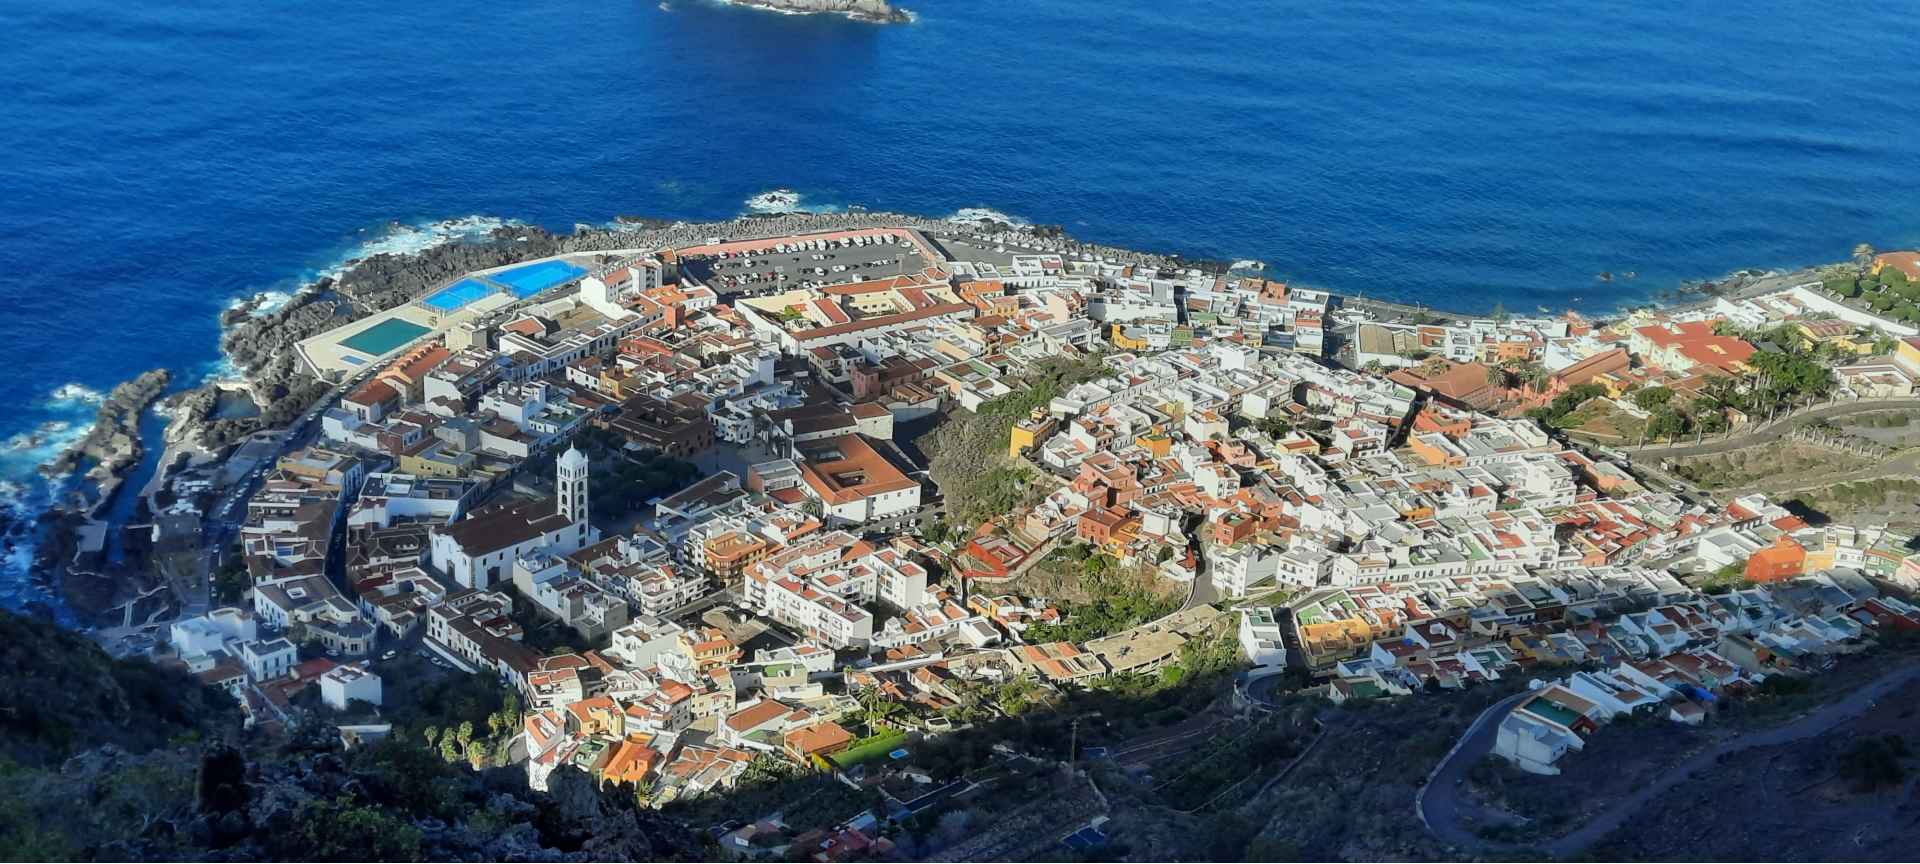 View from above of the little harbour town of Garachico